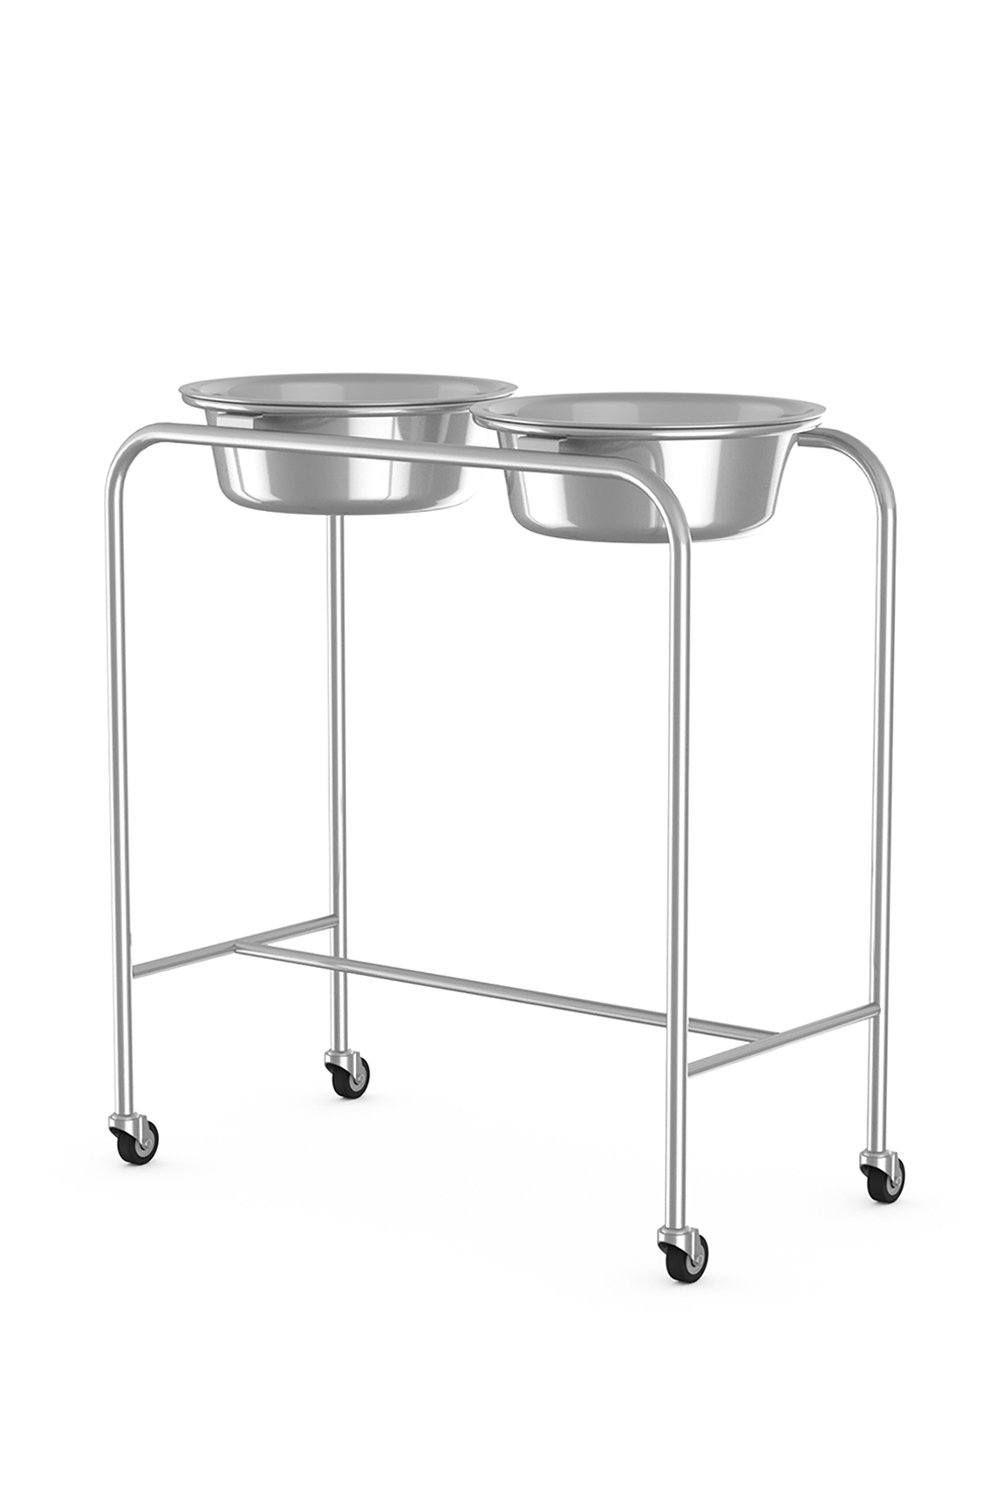 Solution Stand Stainless Solutions Acart 28"D x 14"W x 34"H 9-1/2 Quart Basins (2) with H Brace 